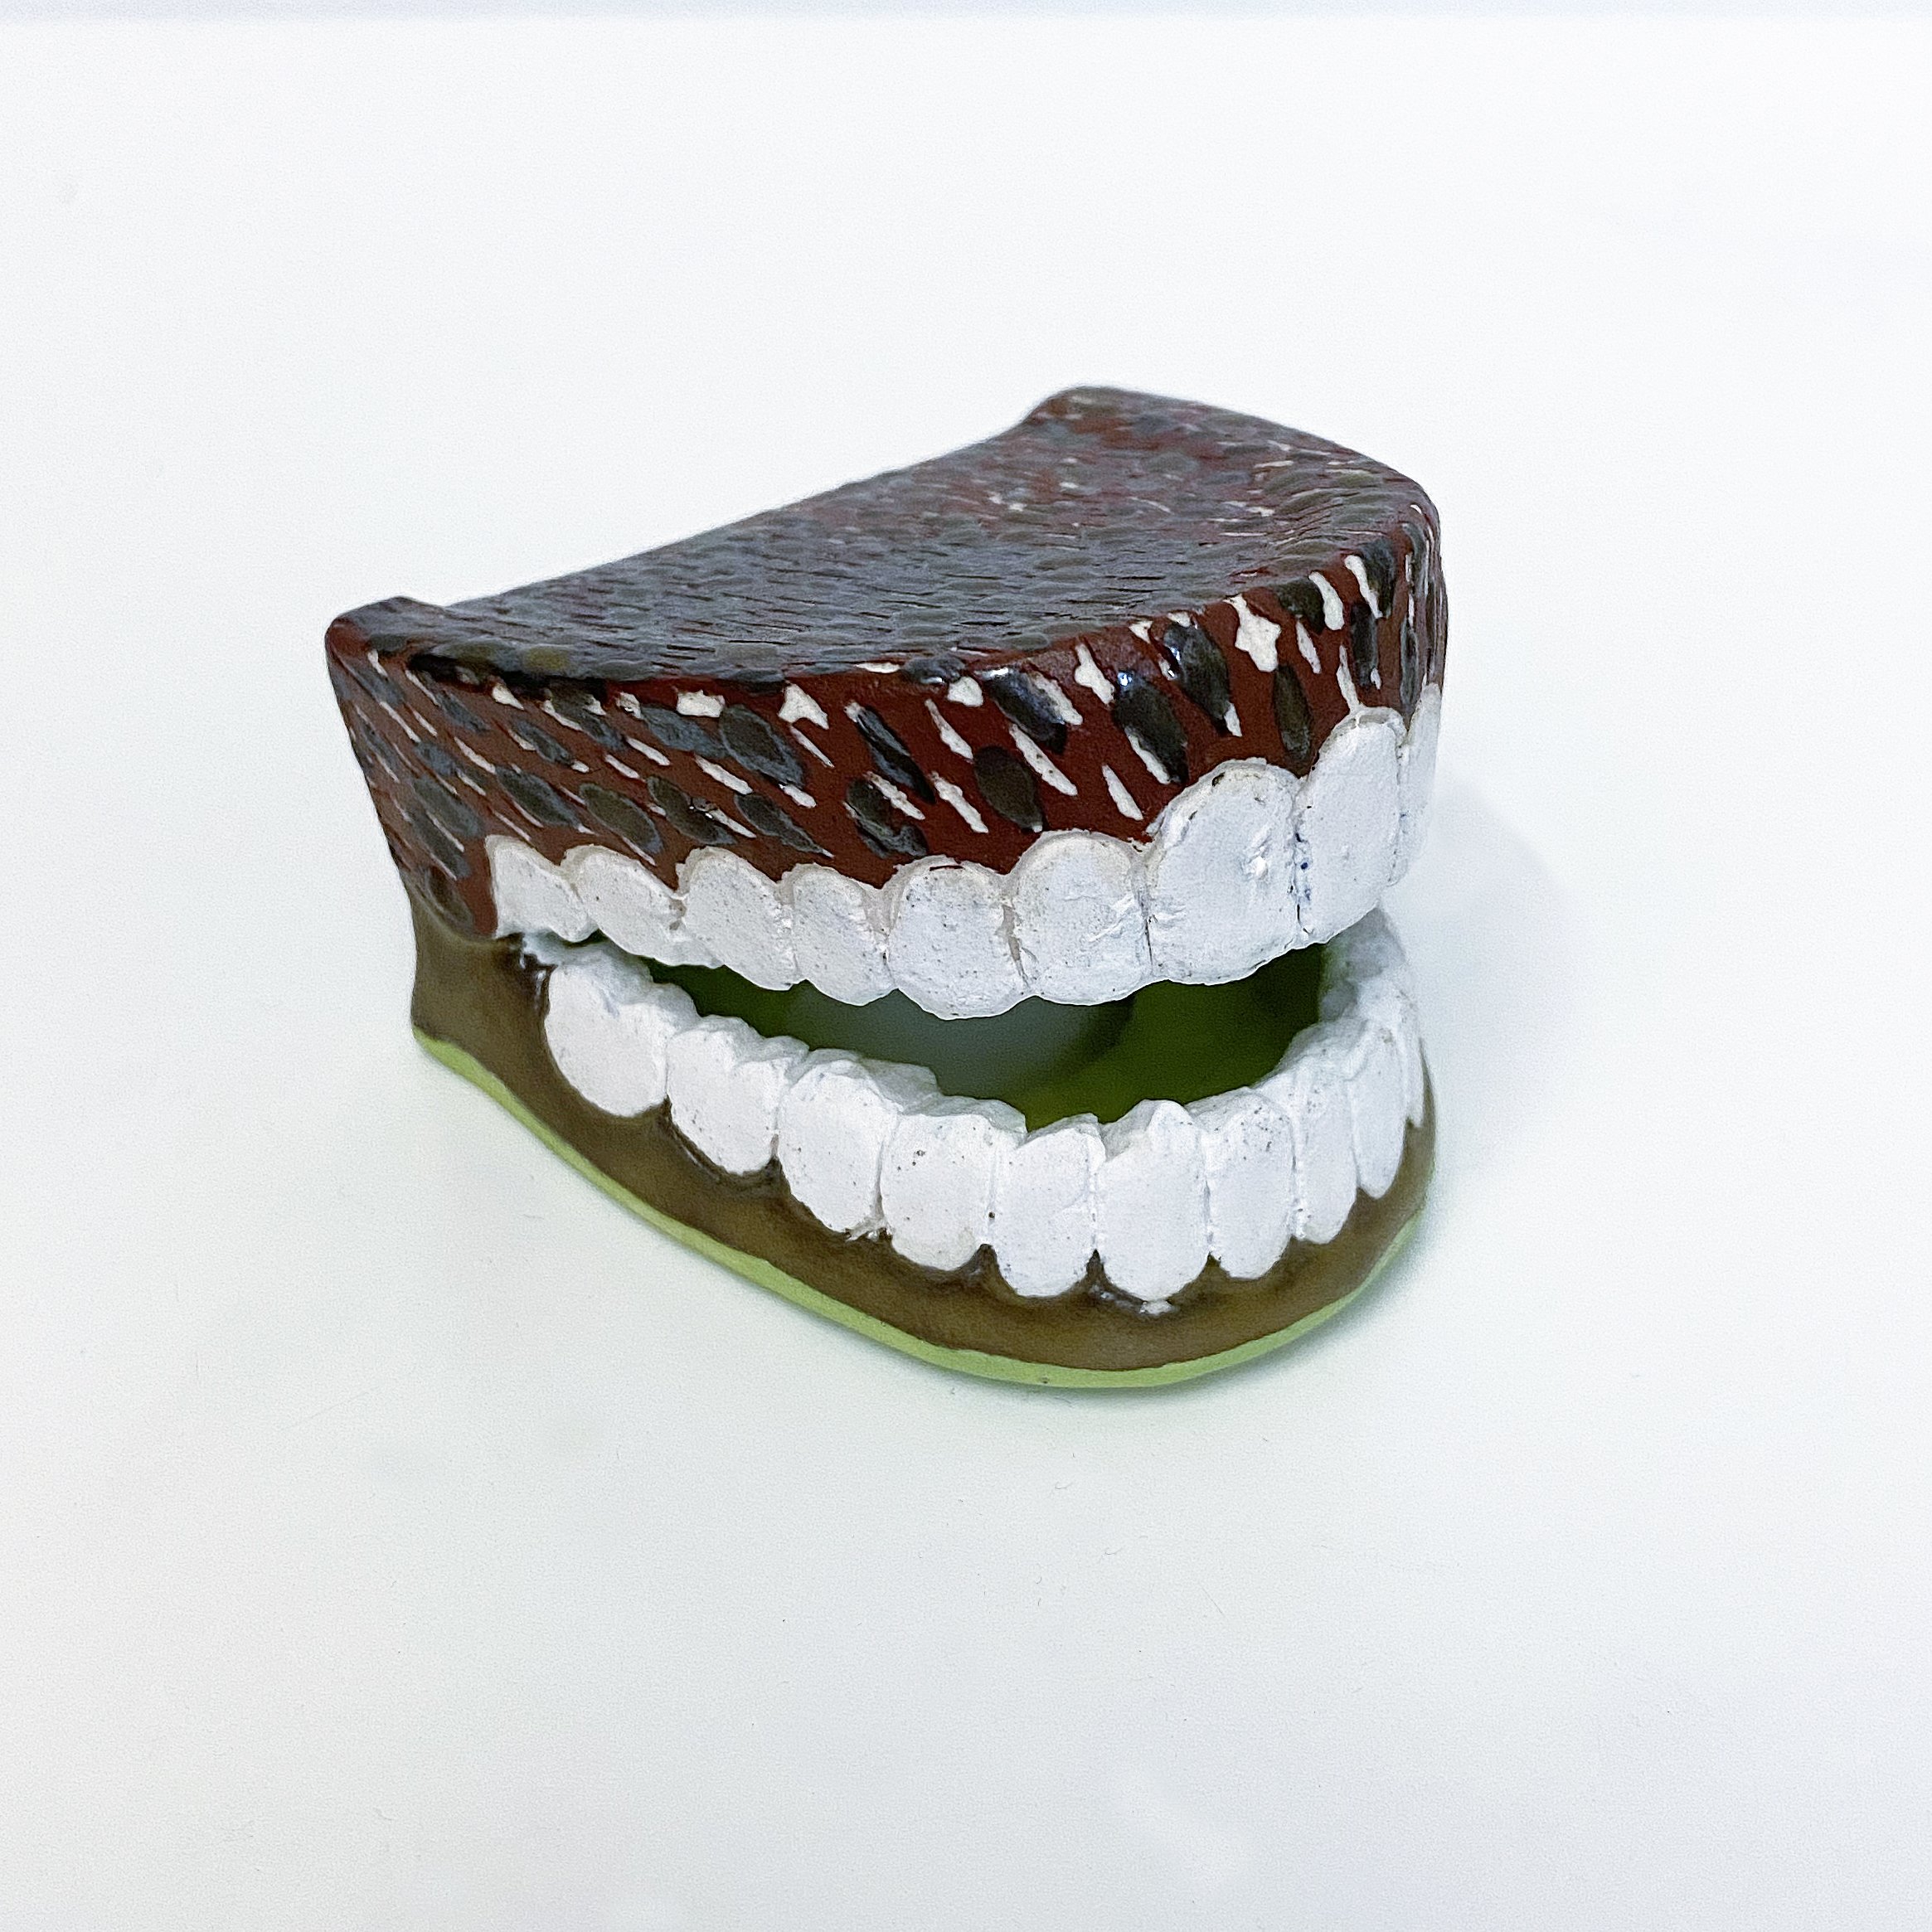 Chattering Teeth: Scratching At Bone Gold Turned Green by Neglect (Copy)